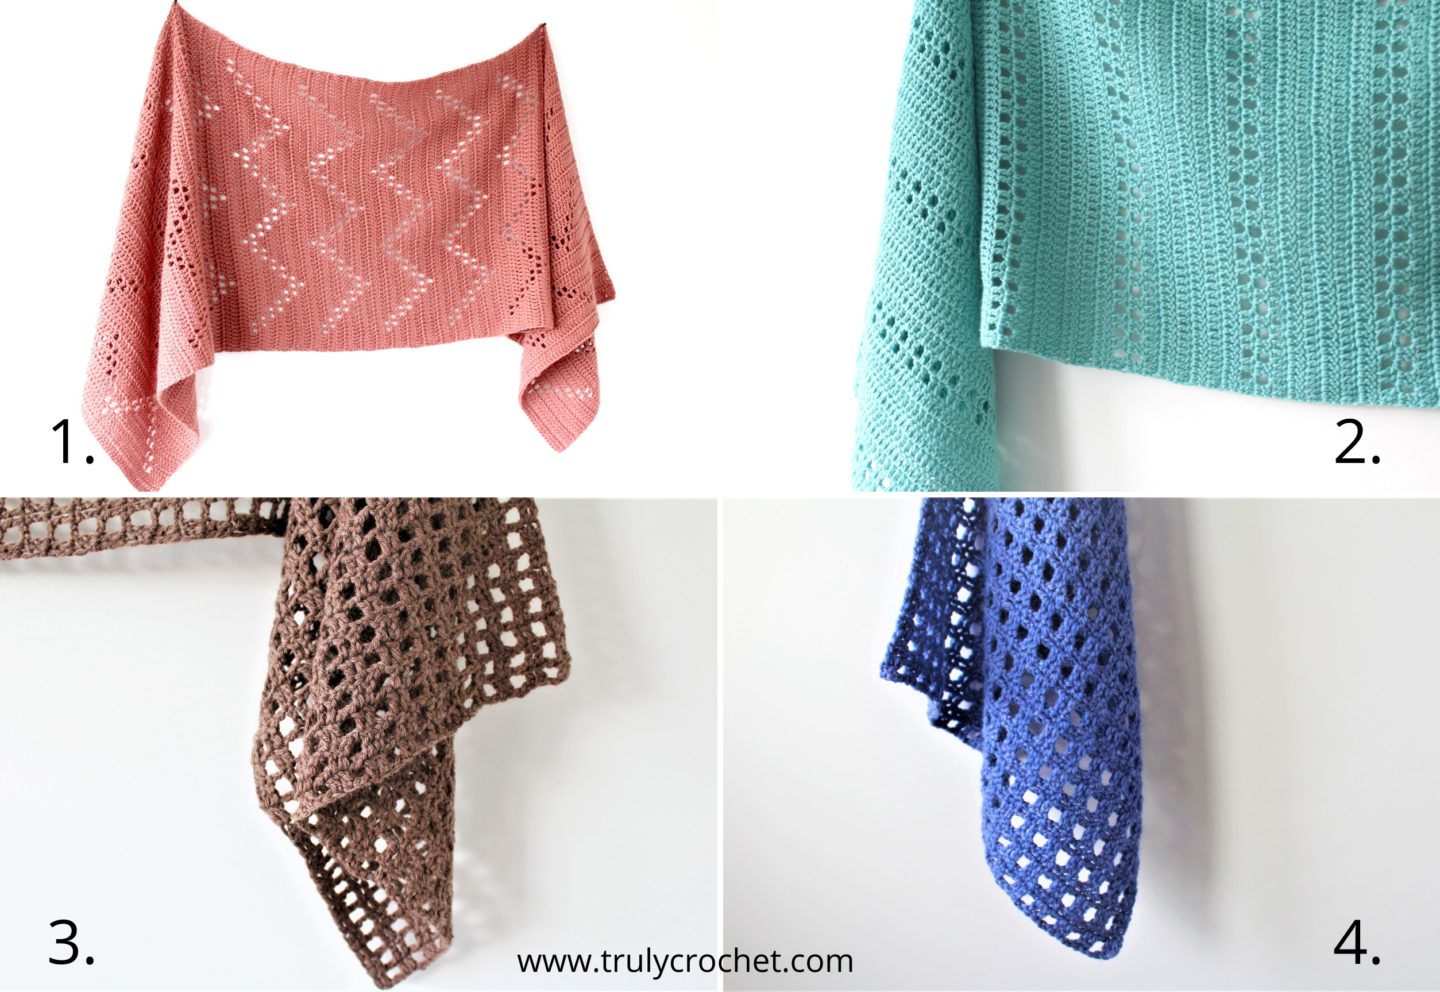 Other Free Crochet Patterns